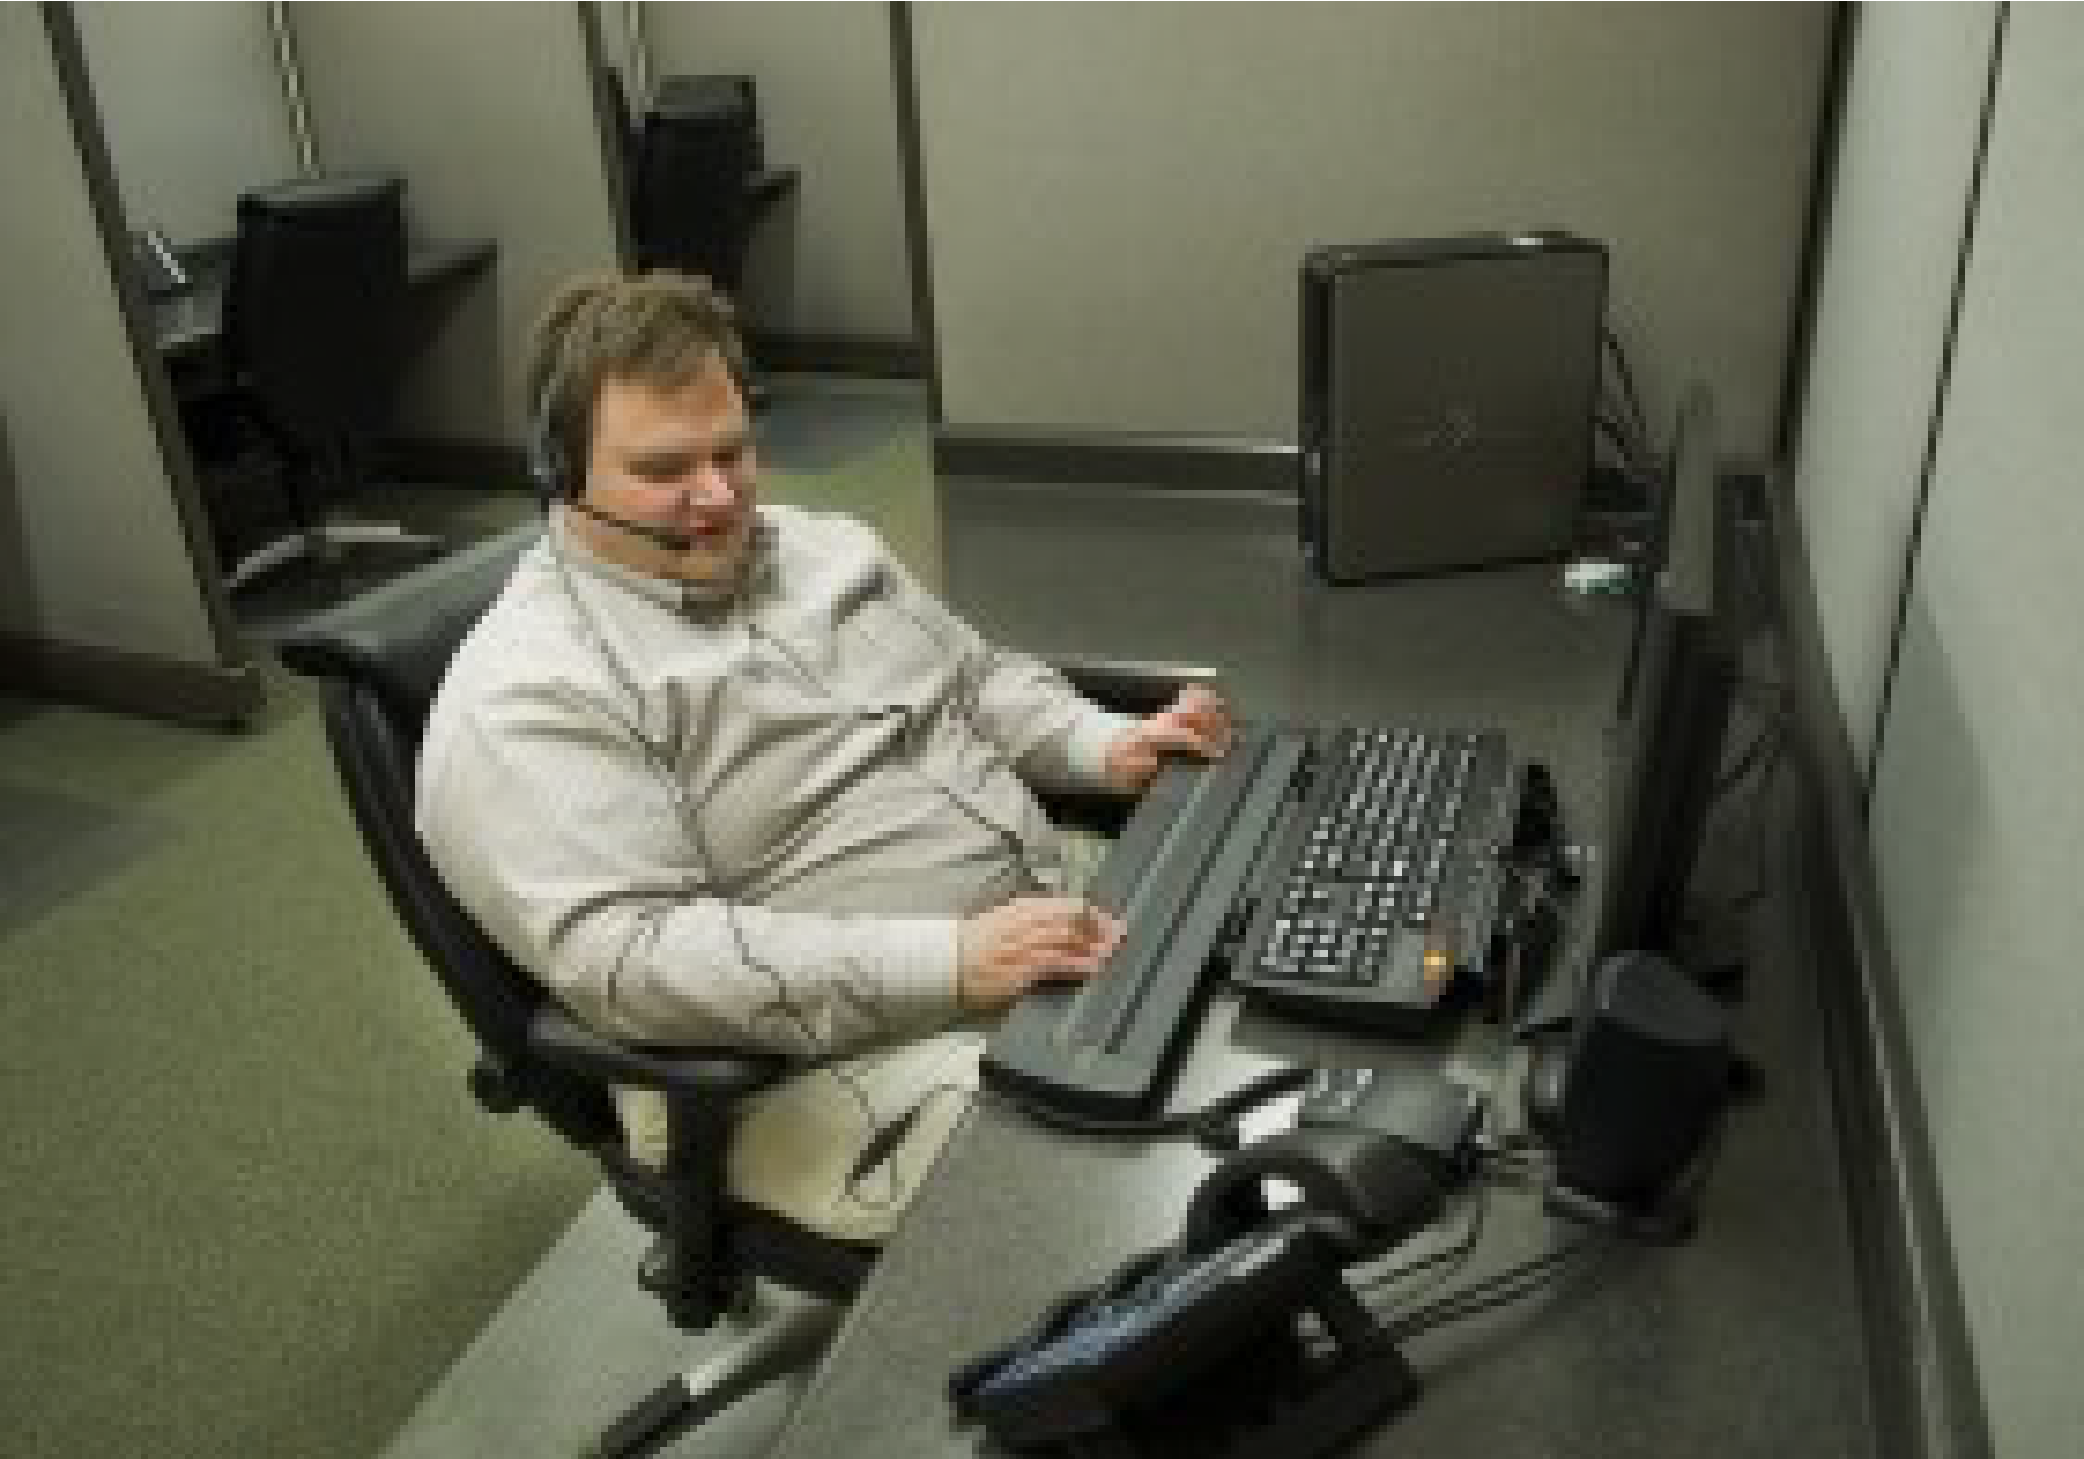 Steve sits at a comfortable desk with a computer and braille display on it.